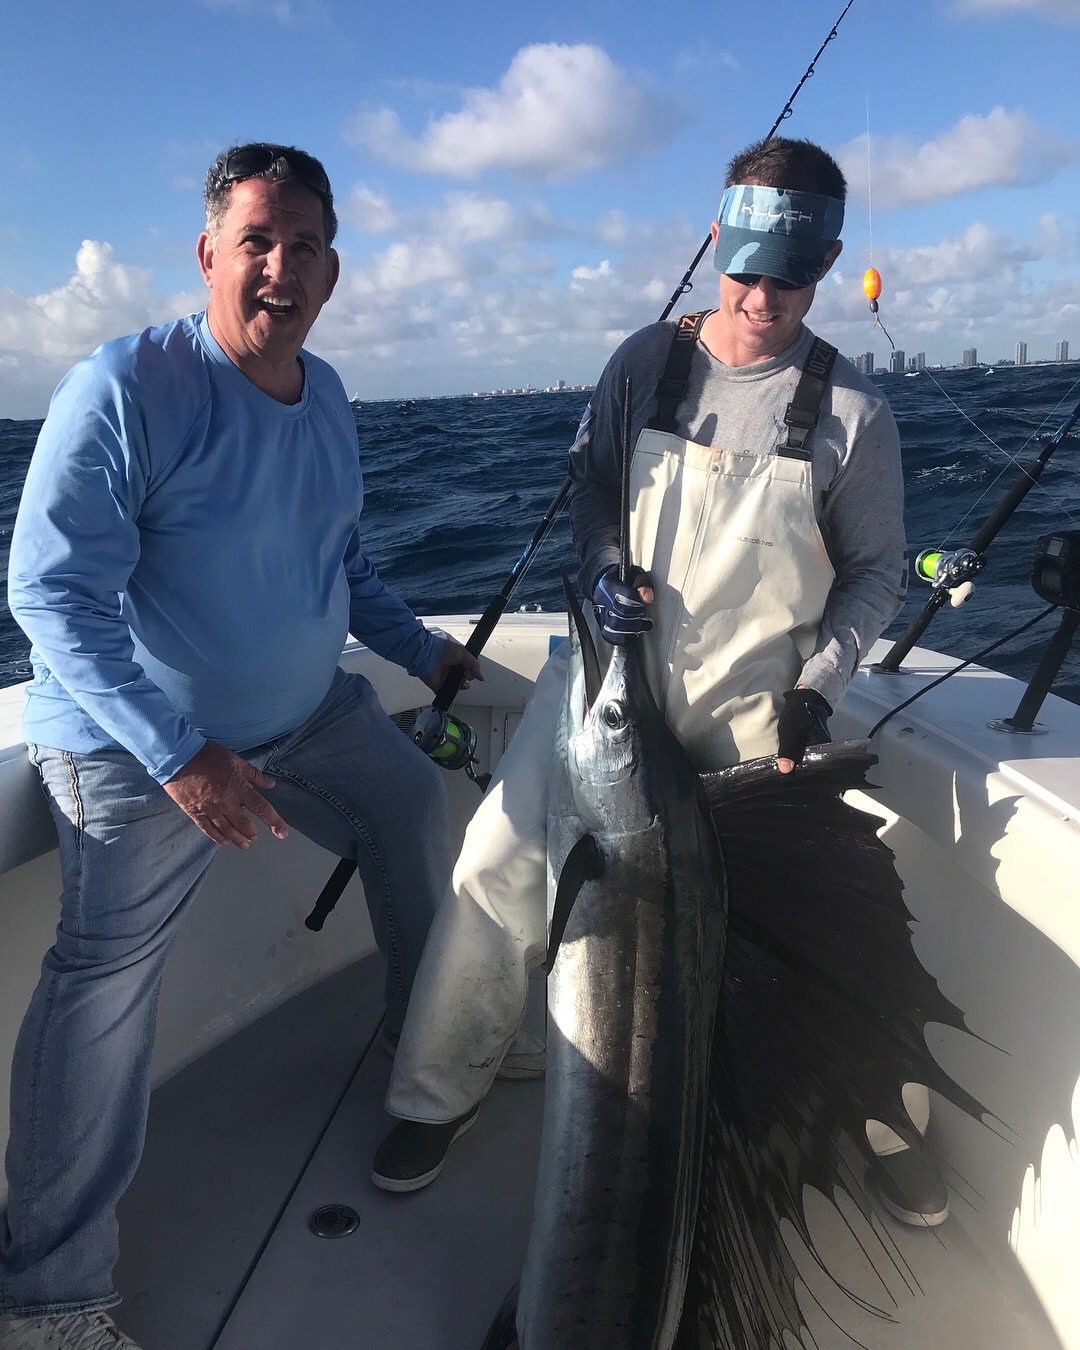 Palm Beach, Florida Offshore Fishing Charters - Palm Beach Offshore Fishing  Charters